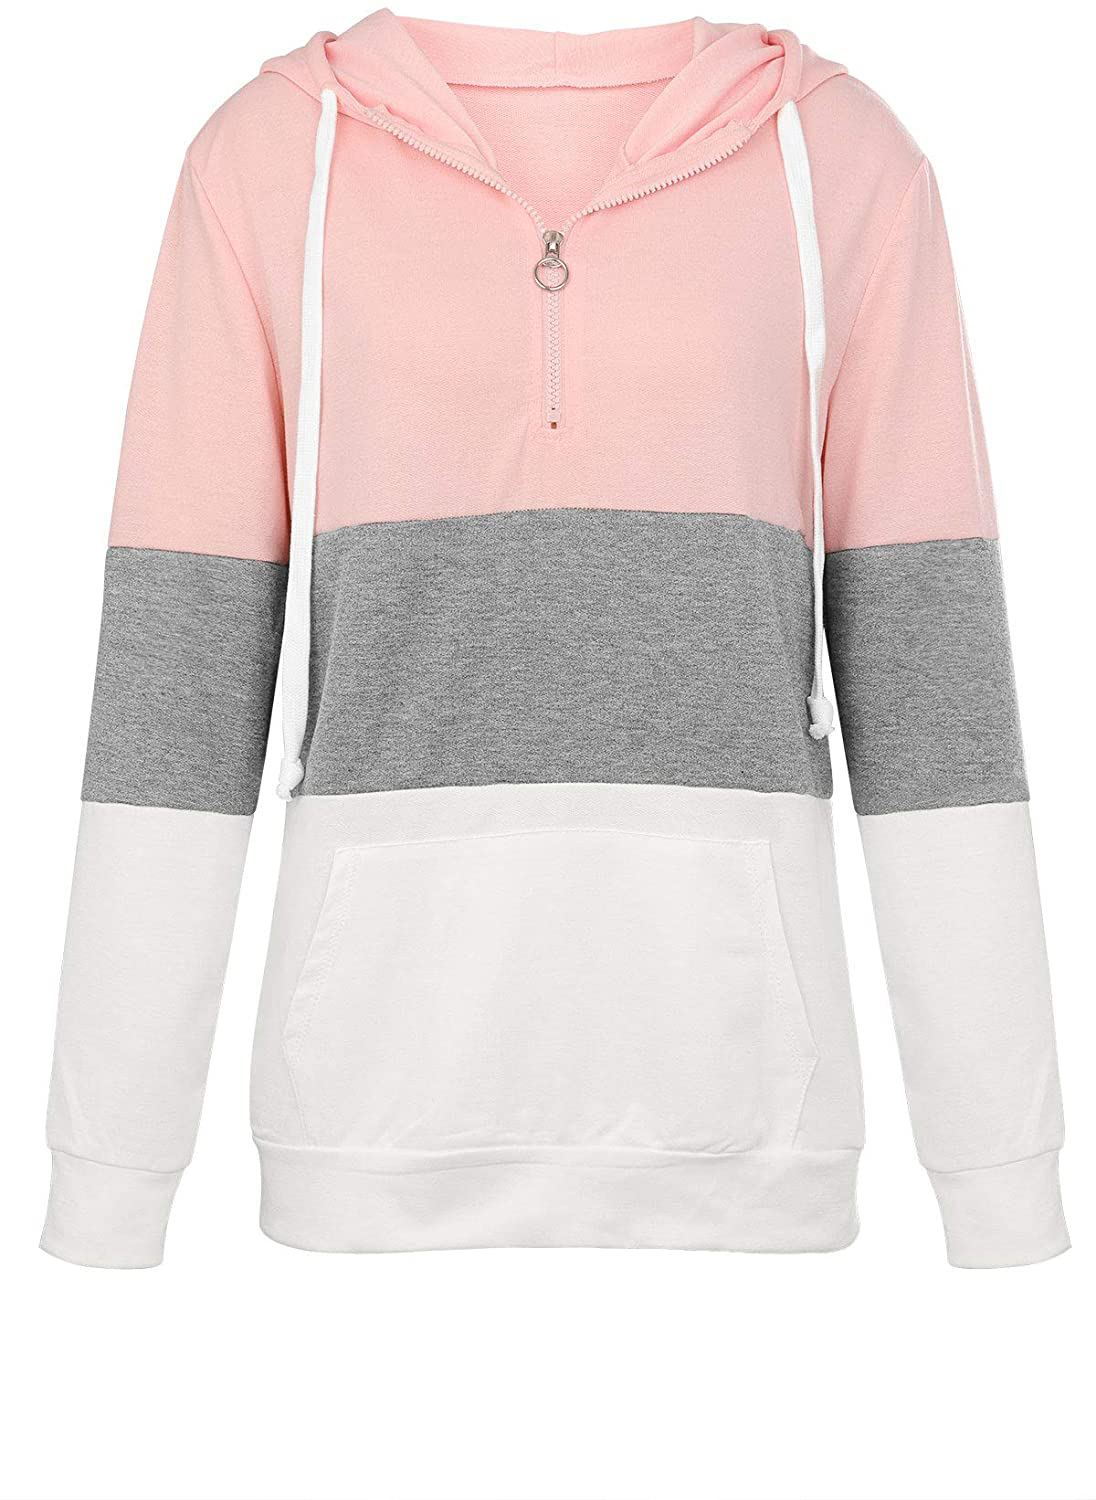 JomeDesign Hoodies for Women Pullover Long Sleeve Color Block 1/4 Zip Casual Sweatshirts with Pockets